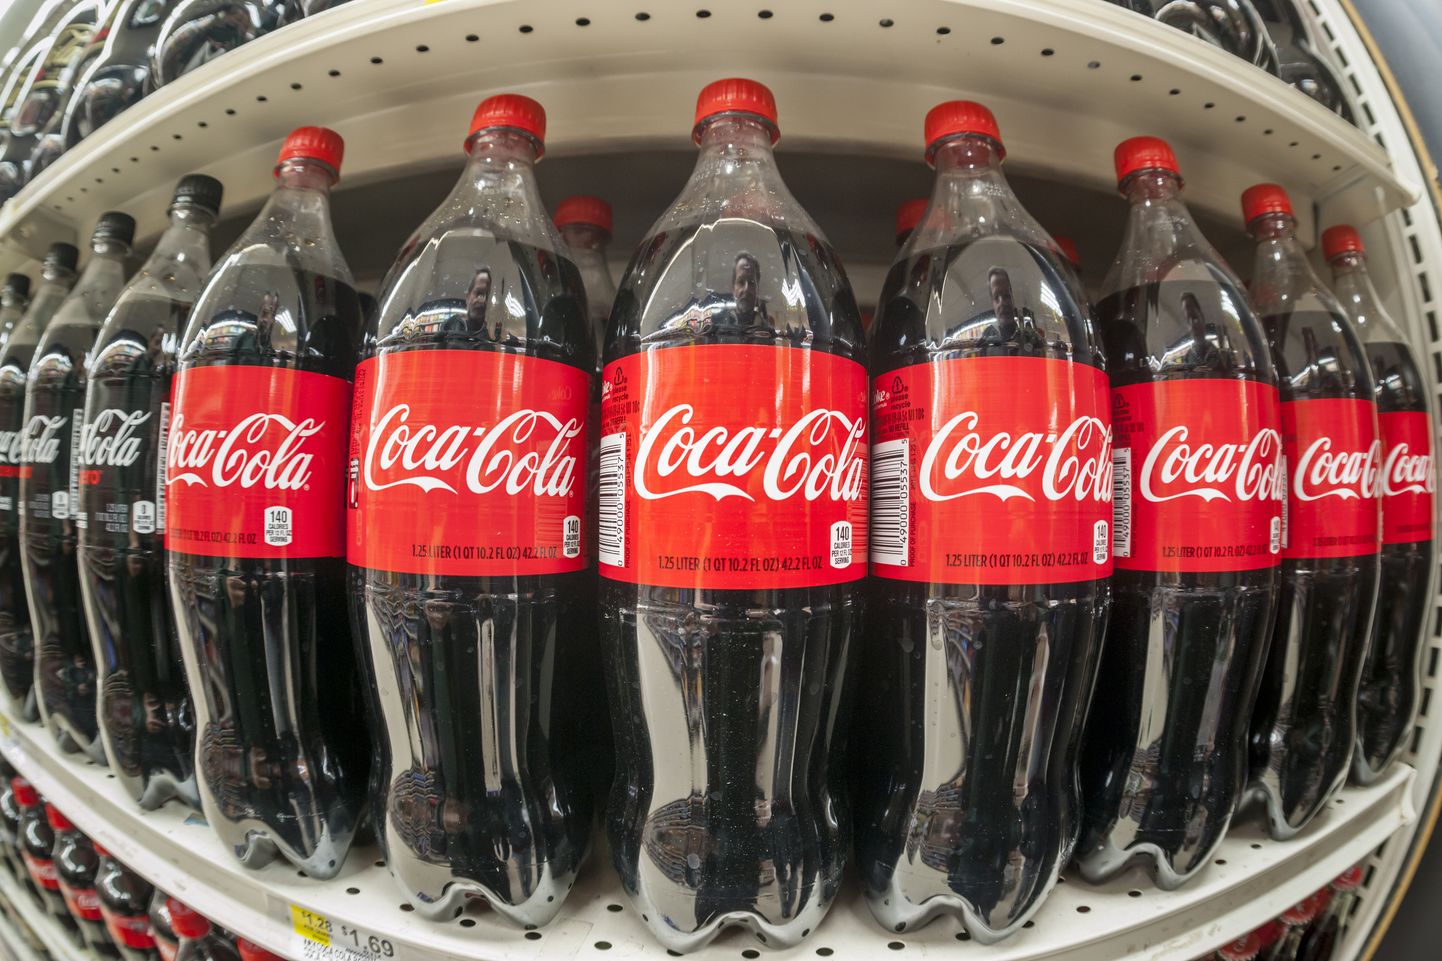 Bottles of Coca-Cola in a grocery store in New York on Tuesday, October 25, 2016. The Coca-Cola Co. reported earnings and revenue that beat analysts' expectations.  (Photo by Richard B. Levine) *** Please Use Credit from Credit Field ***